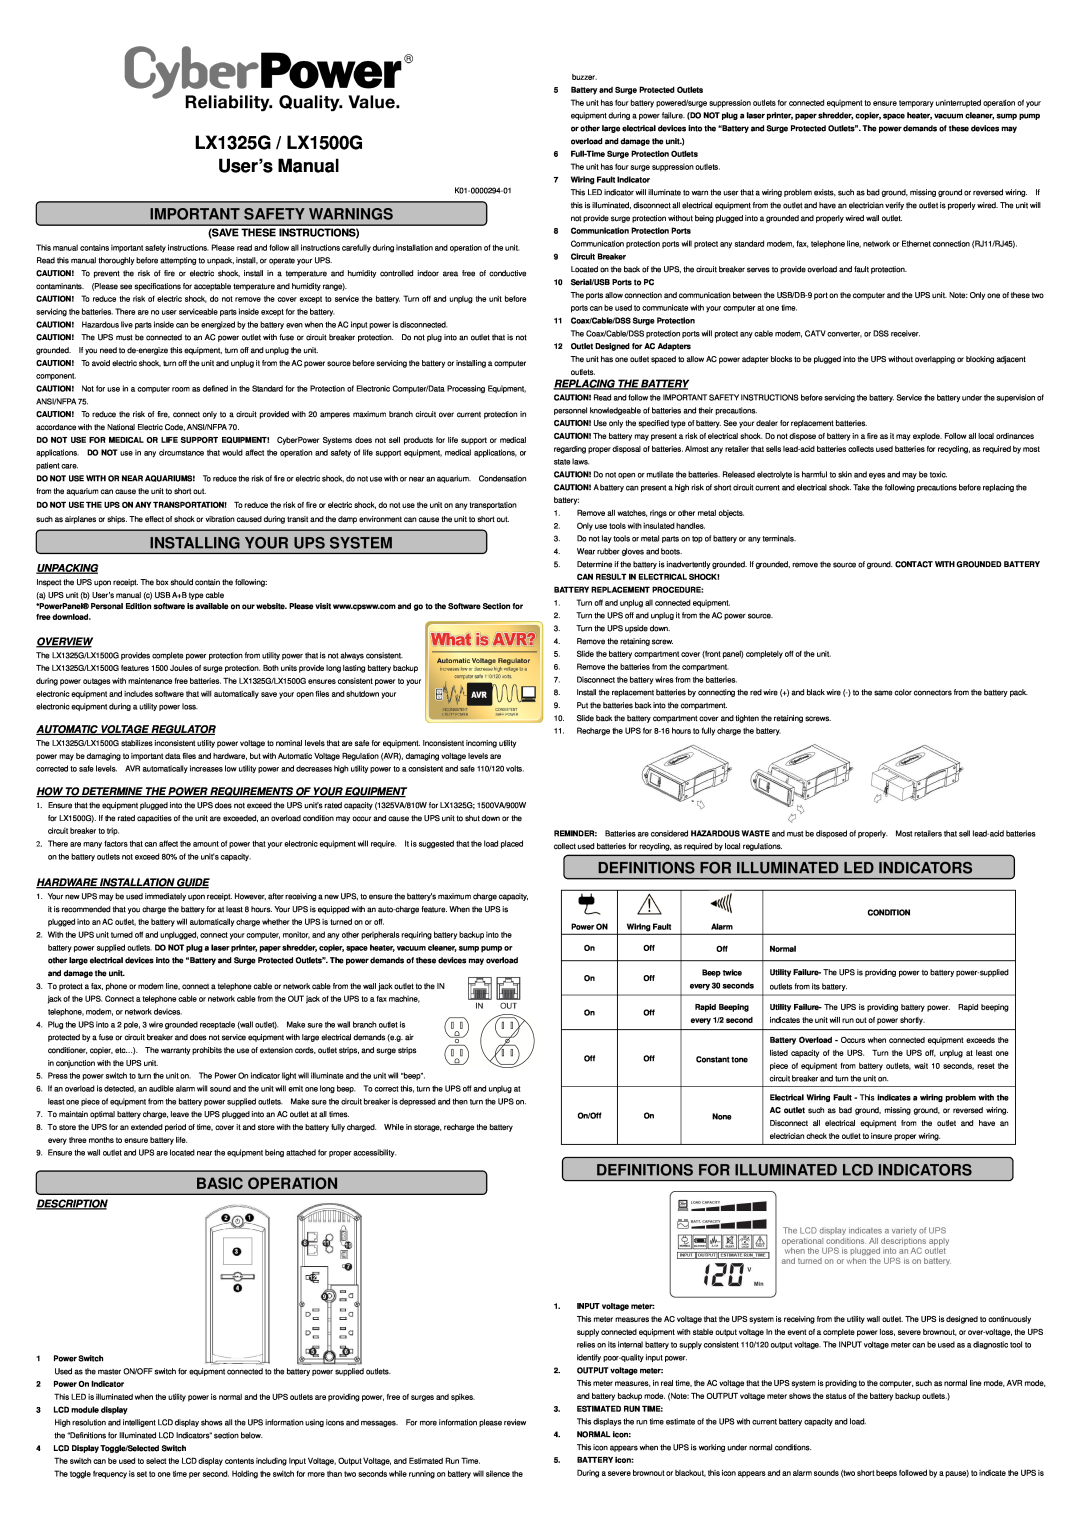 CyberPower Systems K01-0000294-01 user manual Important Safety Warnings, Installing Your Ups System, Basic Operation 